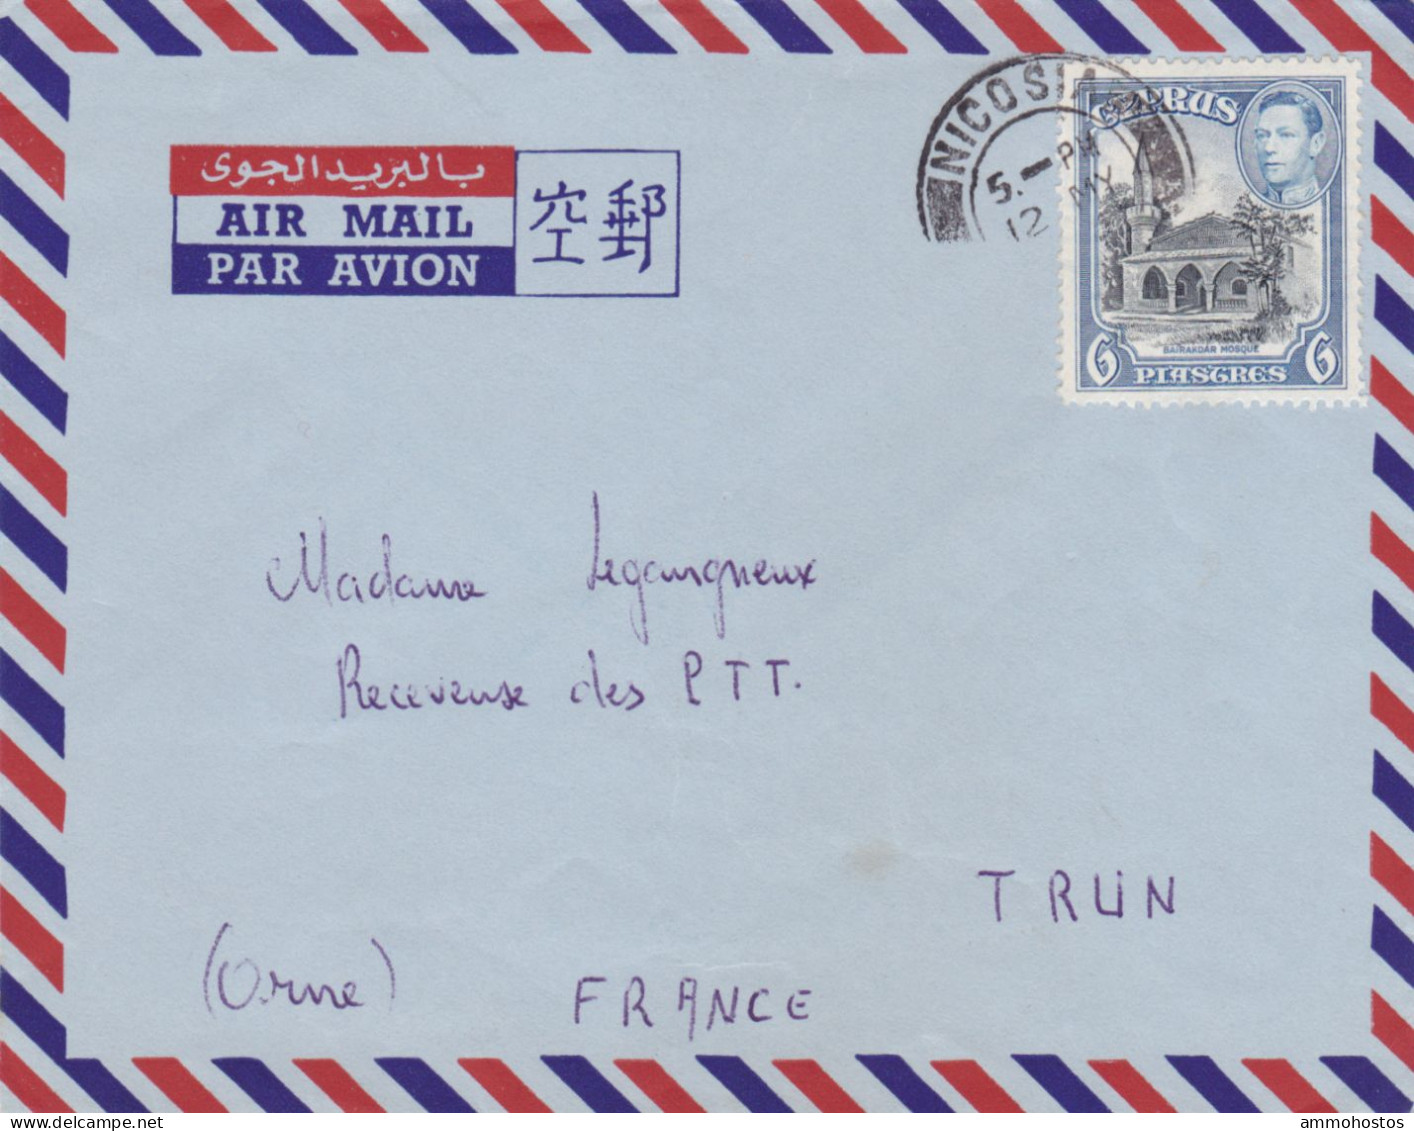 CYPRUS KGVI AIRMAIL COVER NICOSIA FRANCE 6 PIASTRE RATE - Chypre (...-1960)